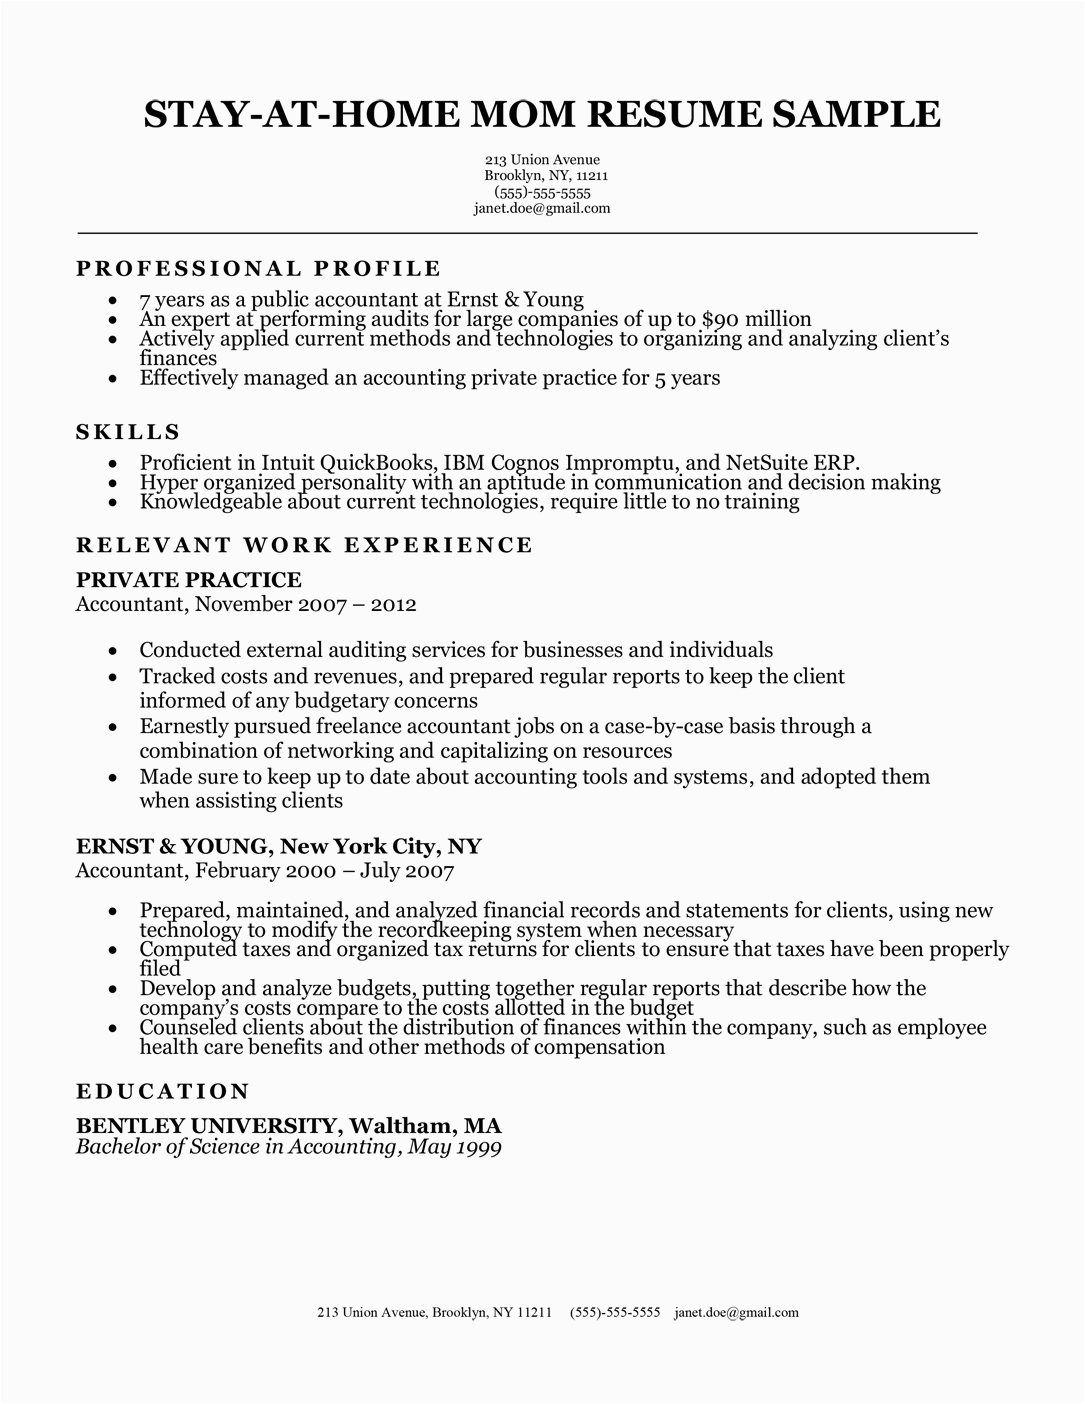 Sample Resume for Stay at Home Mom Reentering Workforce Stay at Home Mom Resume Sample & Writing Tips